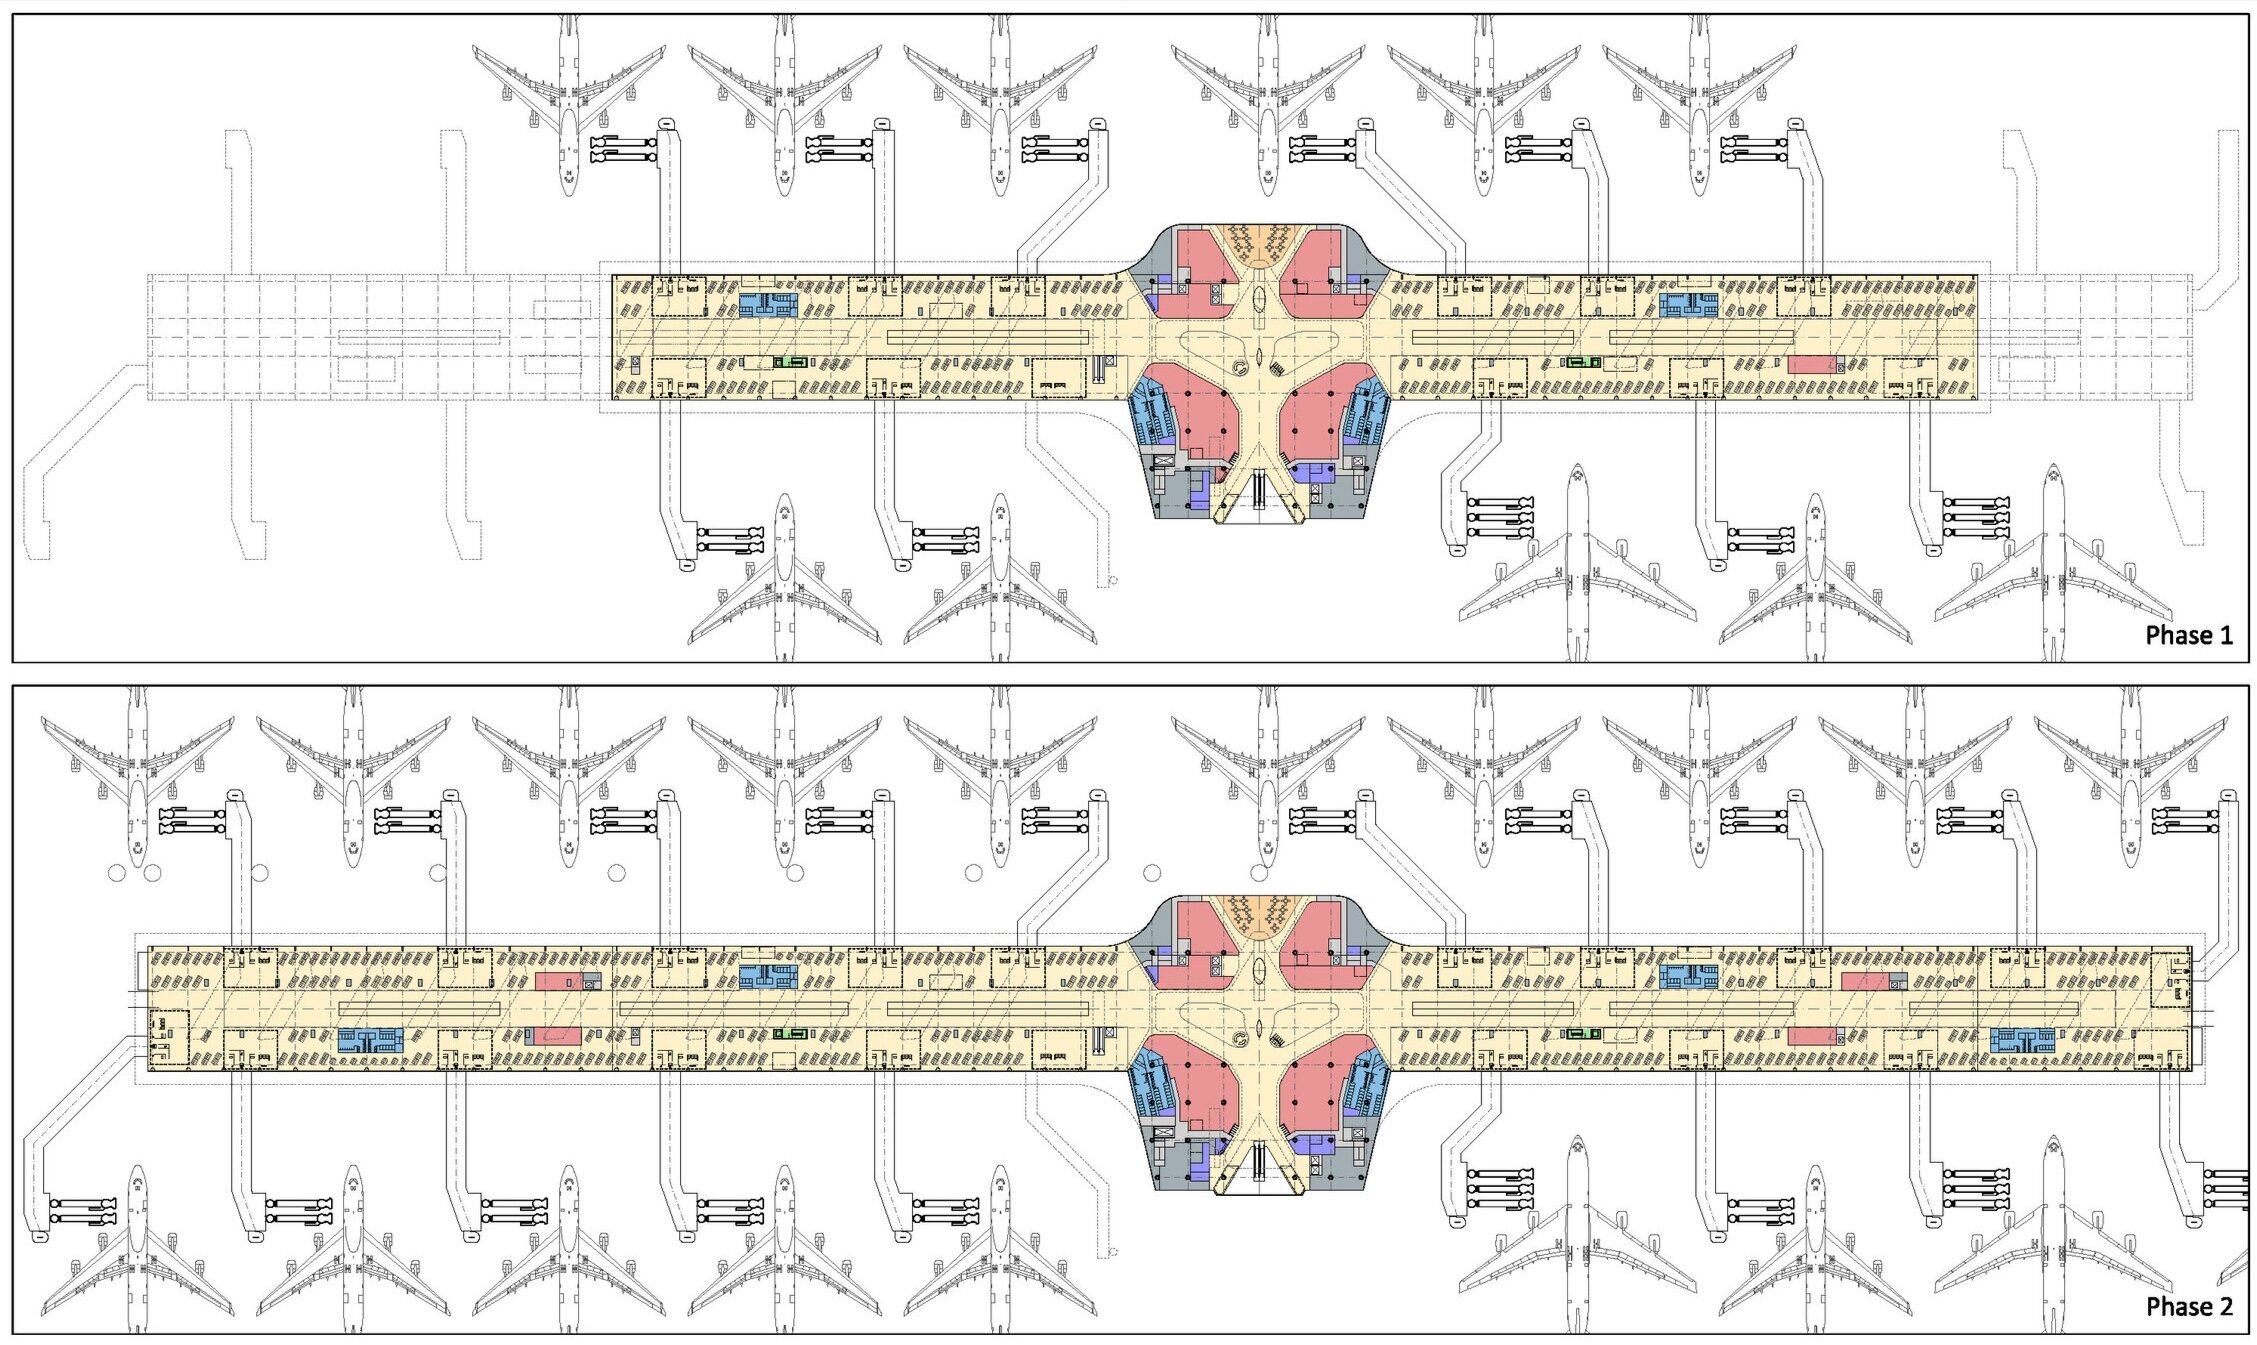 Floor plans of the Terminal 1 Midfield Concourse (MFC) at the HKIA